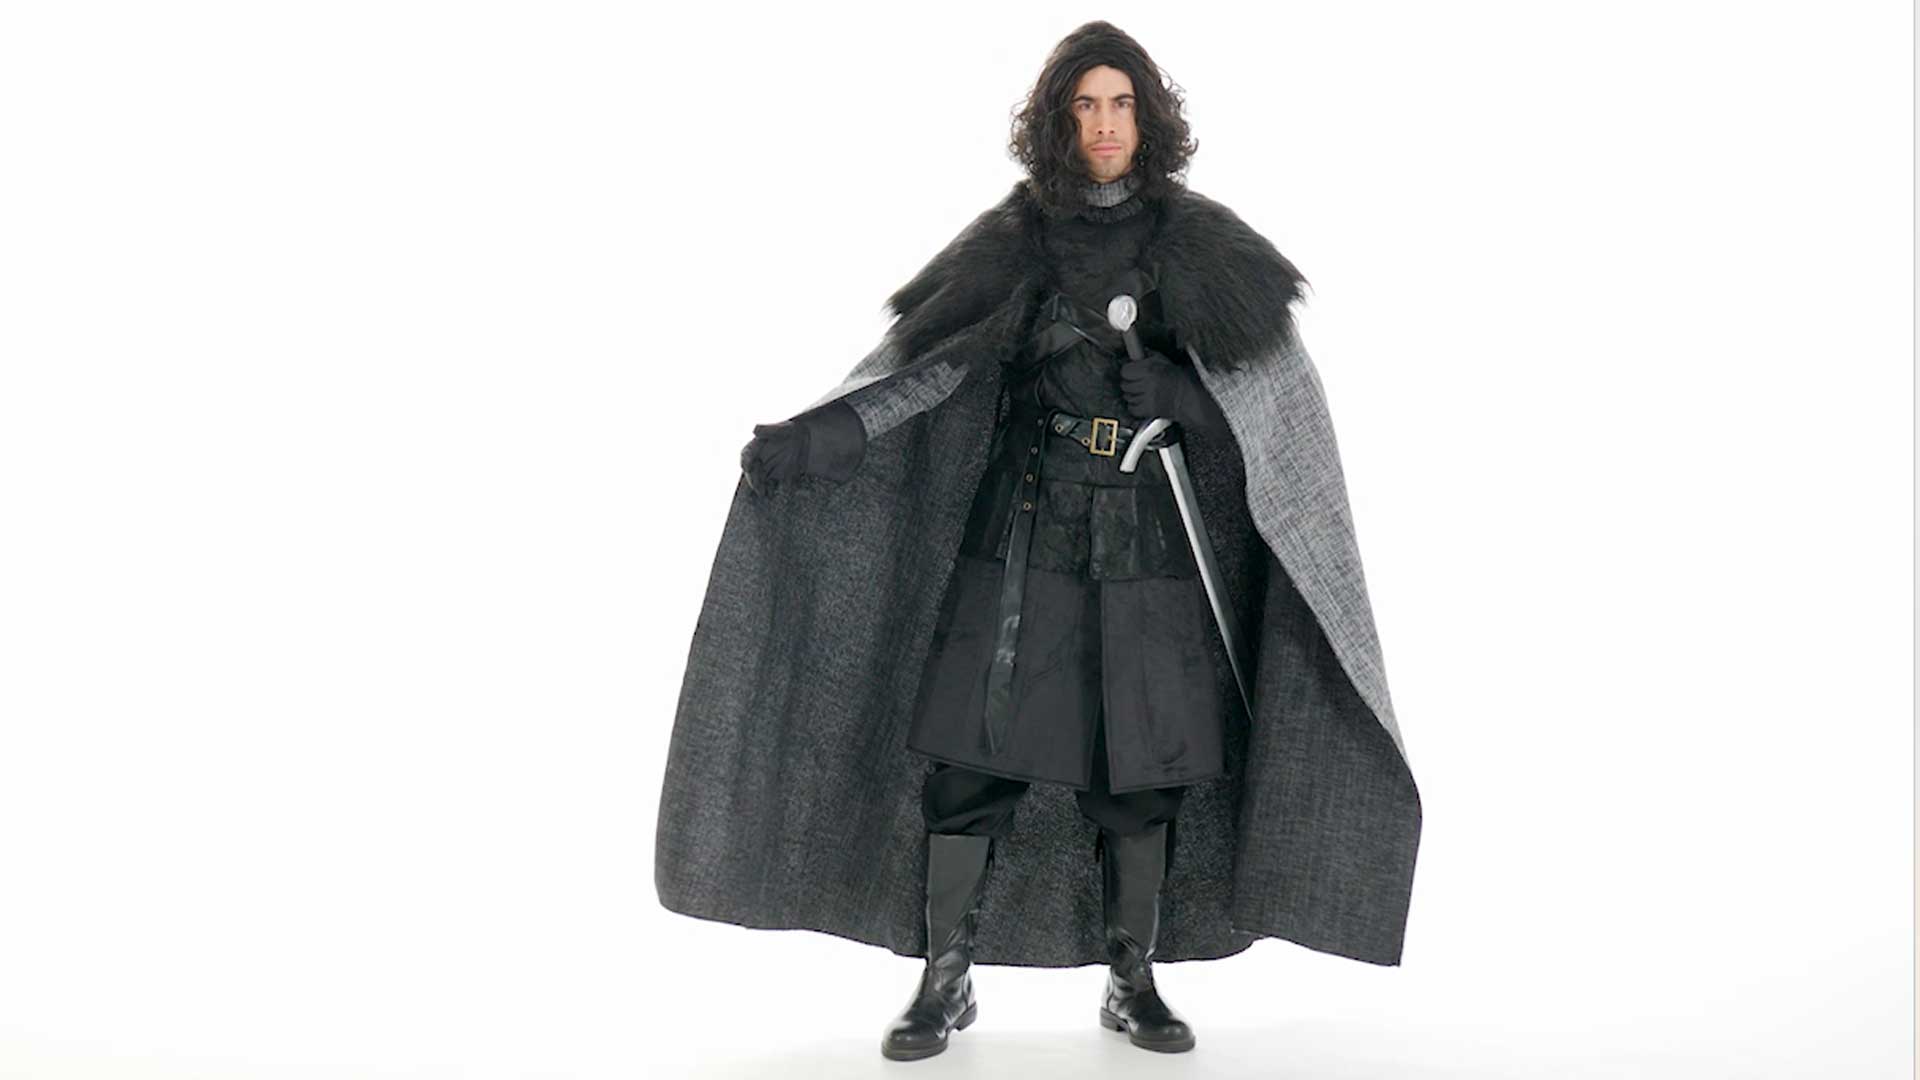 Don't get yourself killed, get yourself ready to lead men against monsters in this Dark Northern King Costume!